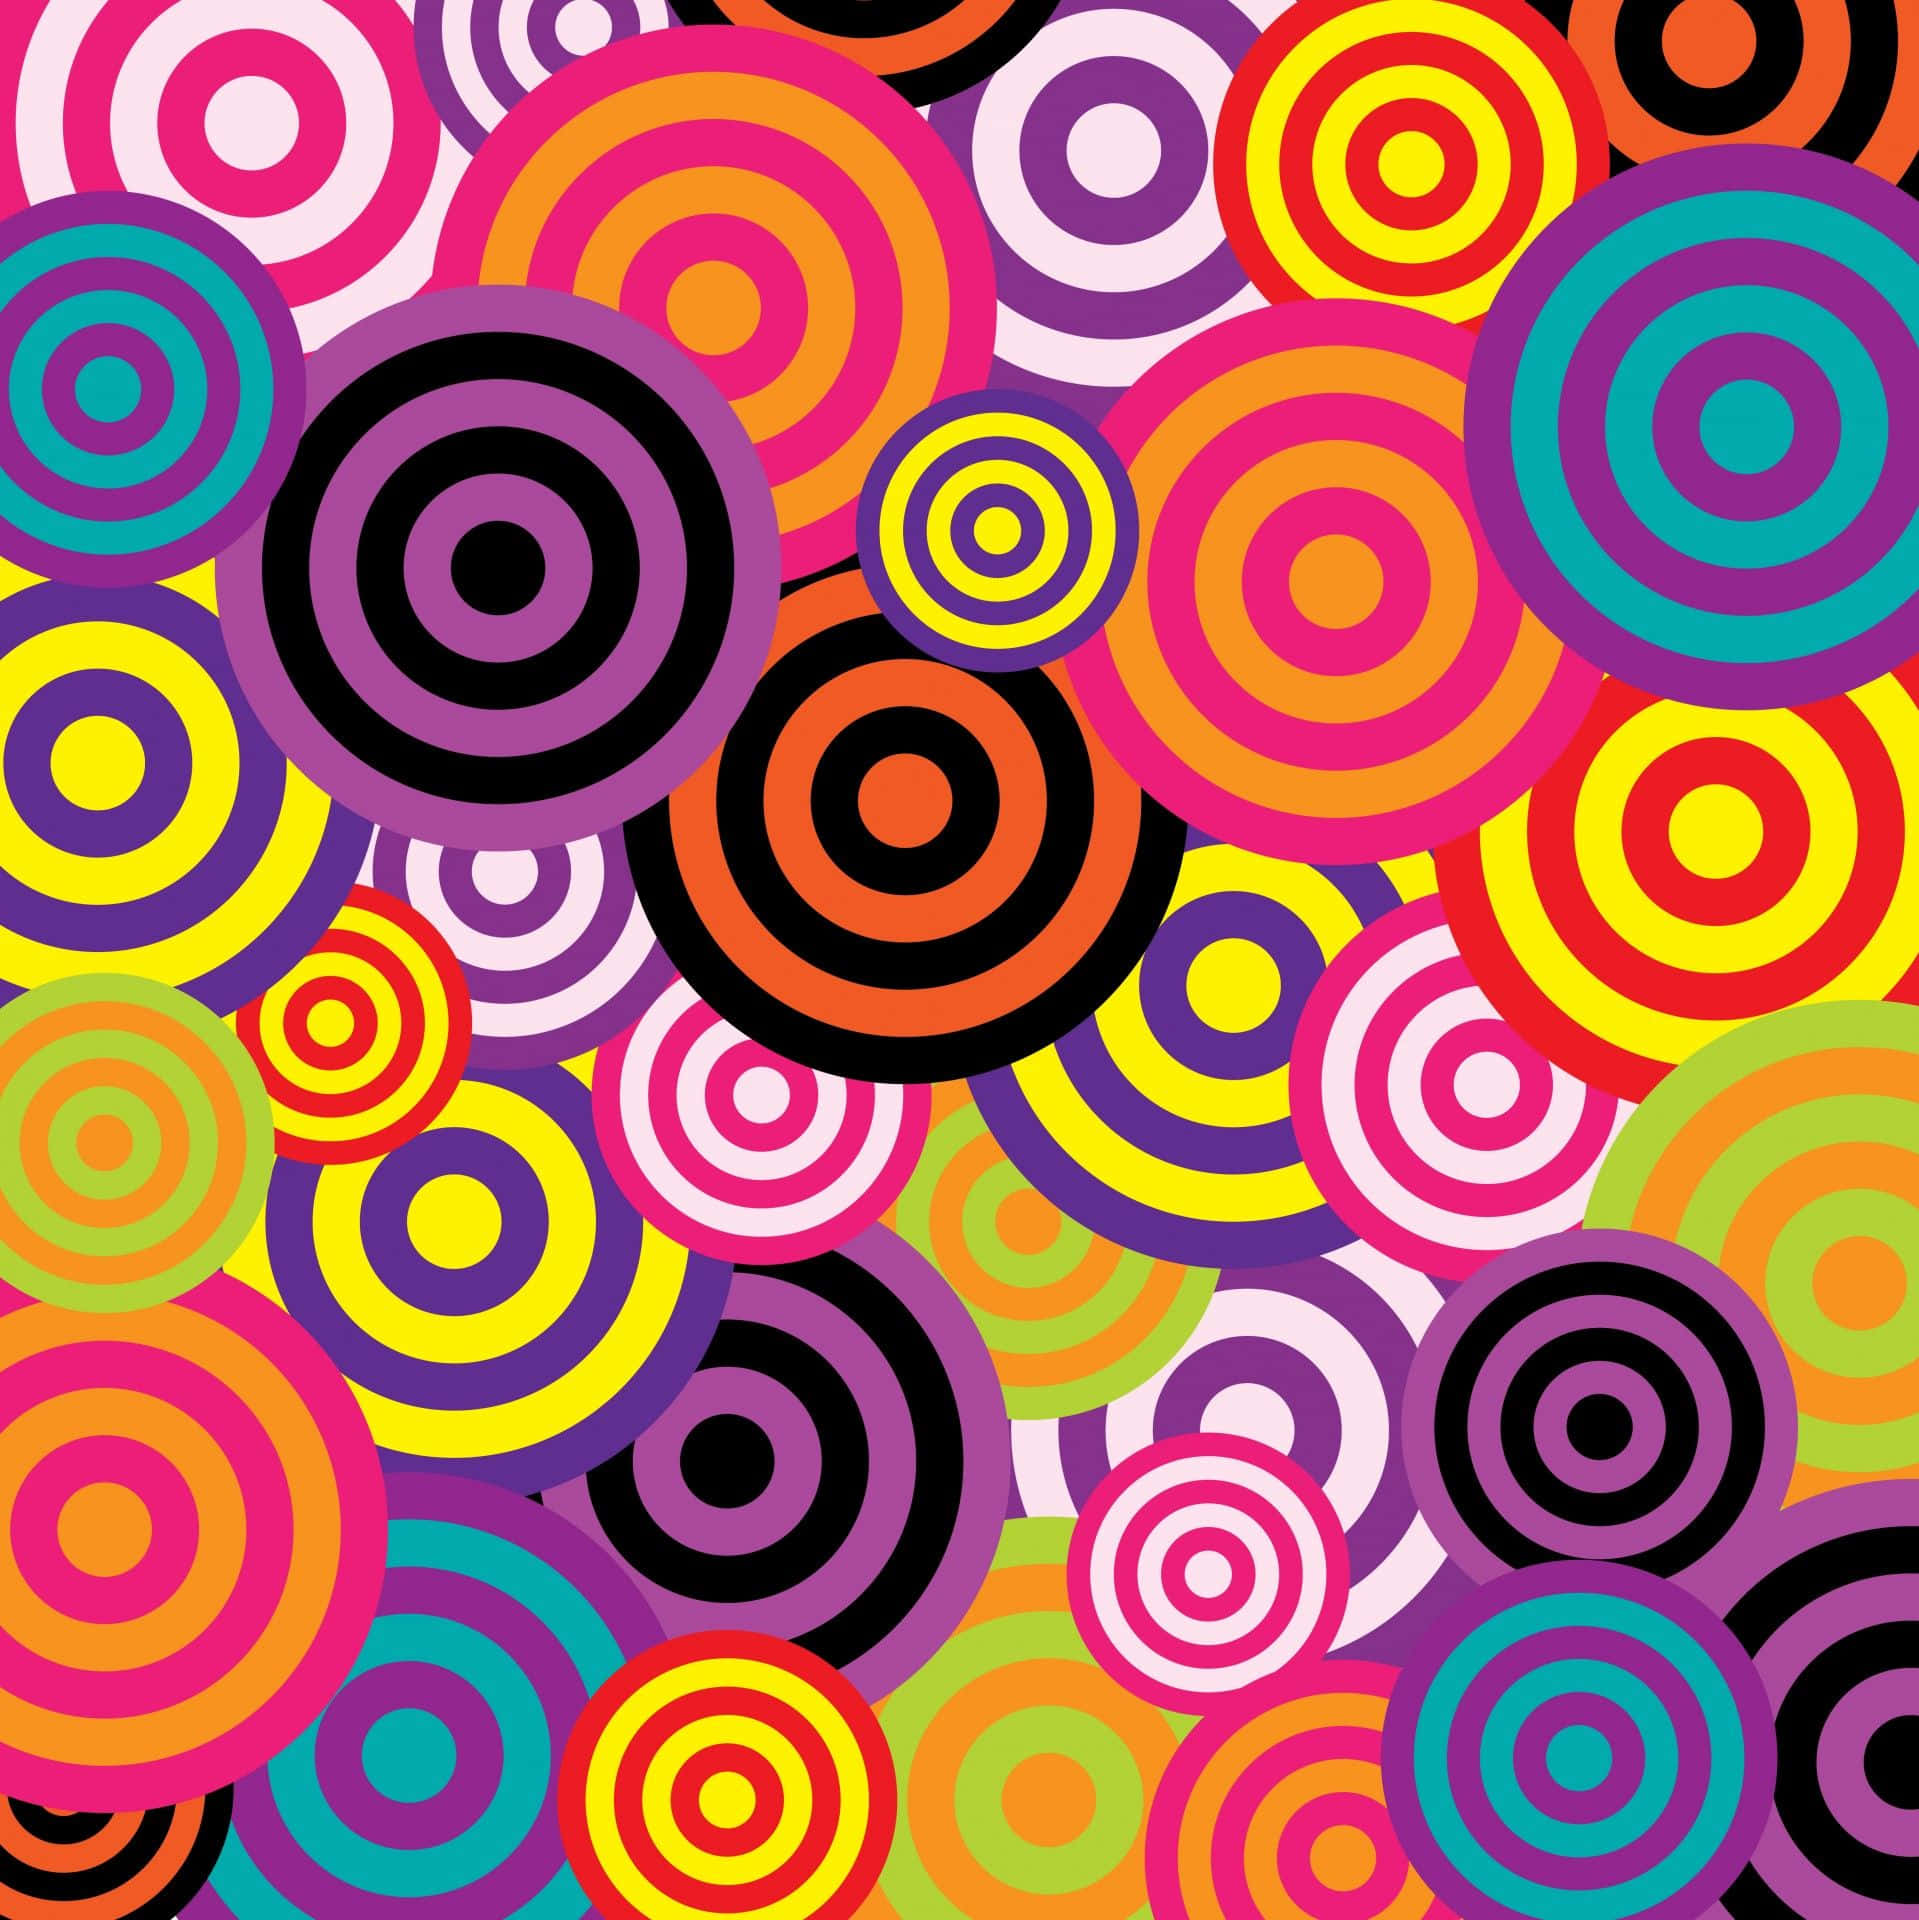 Take a Trip Back to the 60s in This Groovy Vintage Design Wallpaper